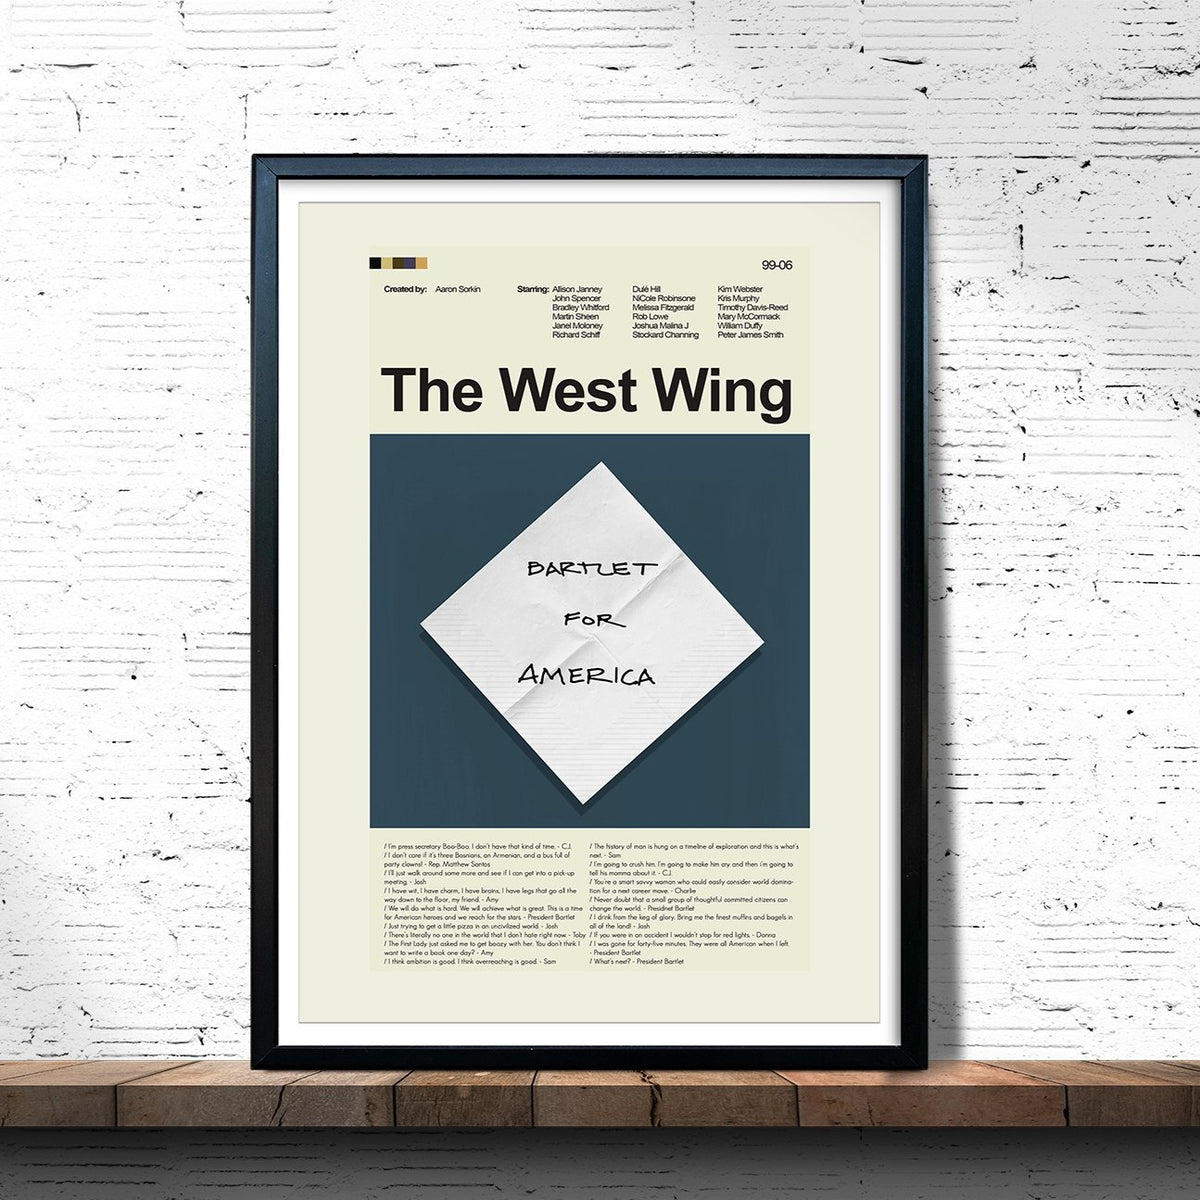 The West Wing - Bartlet for America  | 12"x18" or 18"x24" Print only